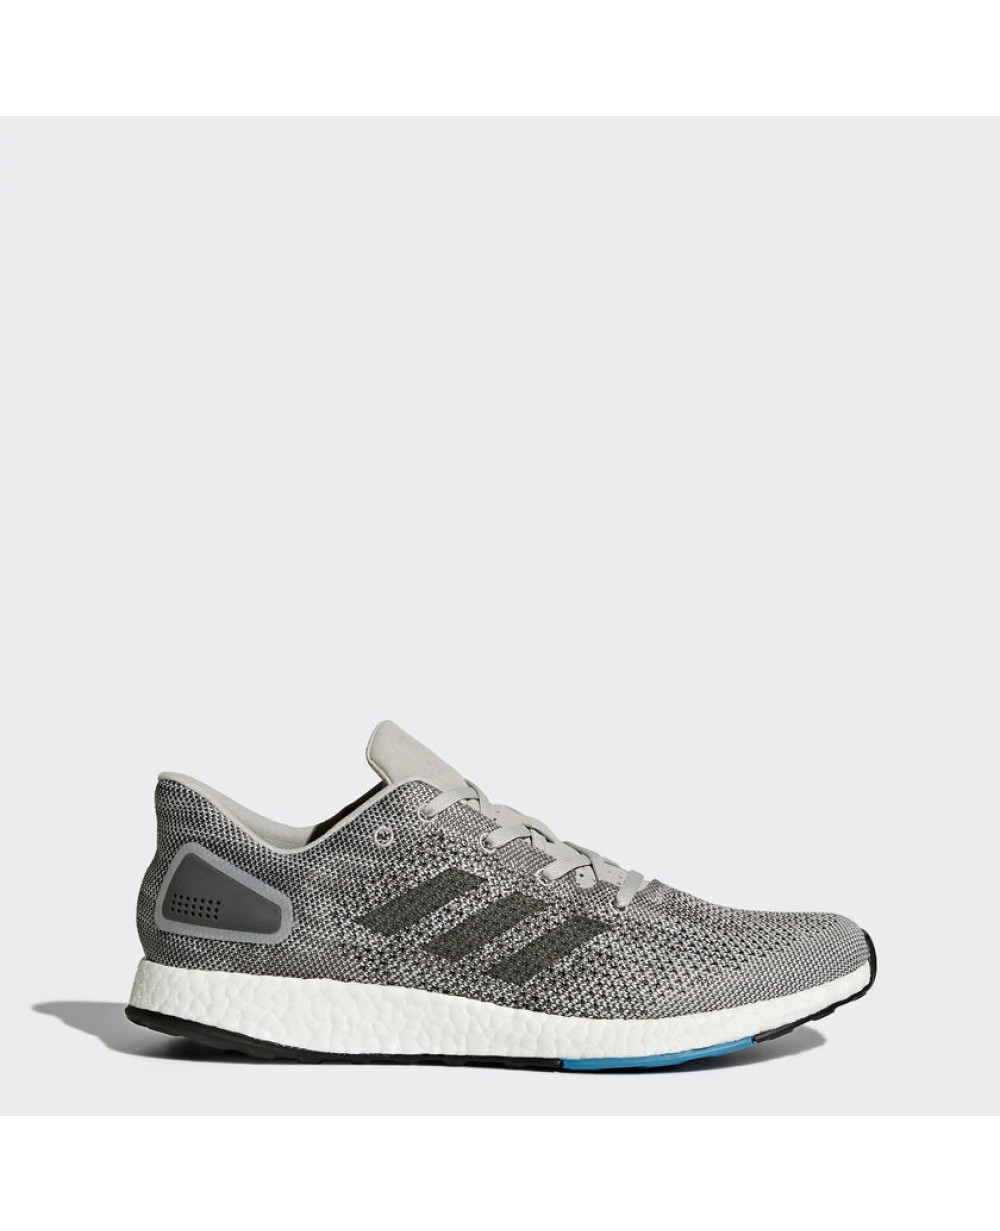 Adidas Pureboost DPR Running Shoes For Men S82010